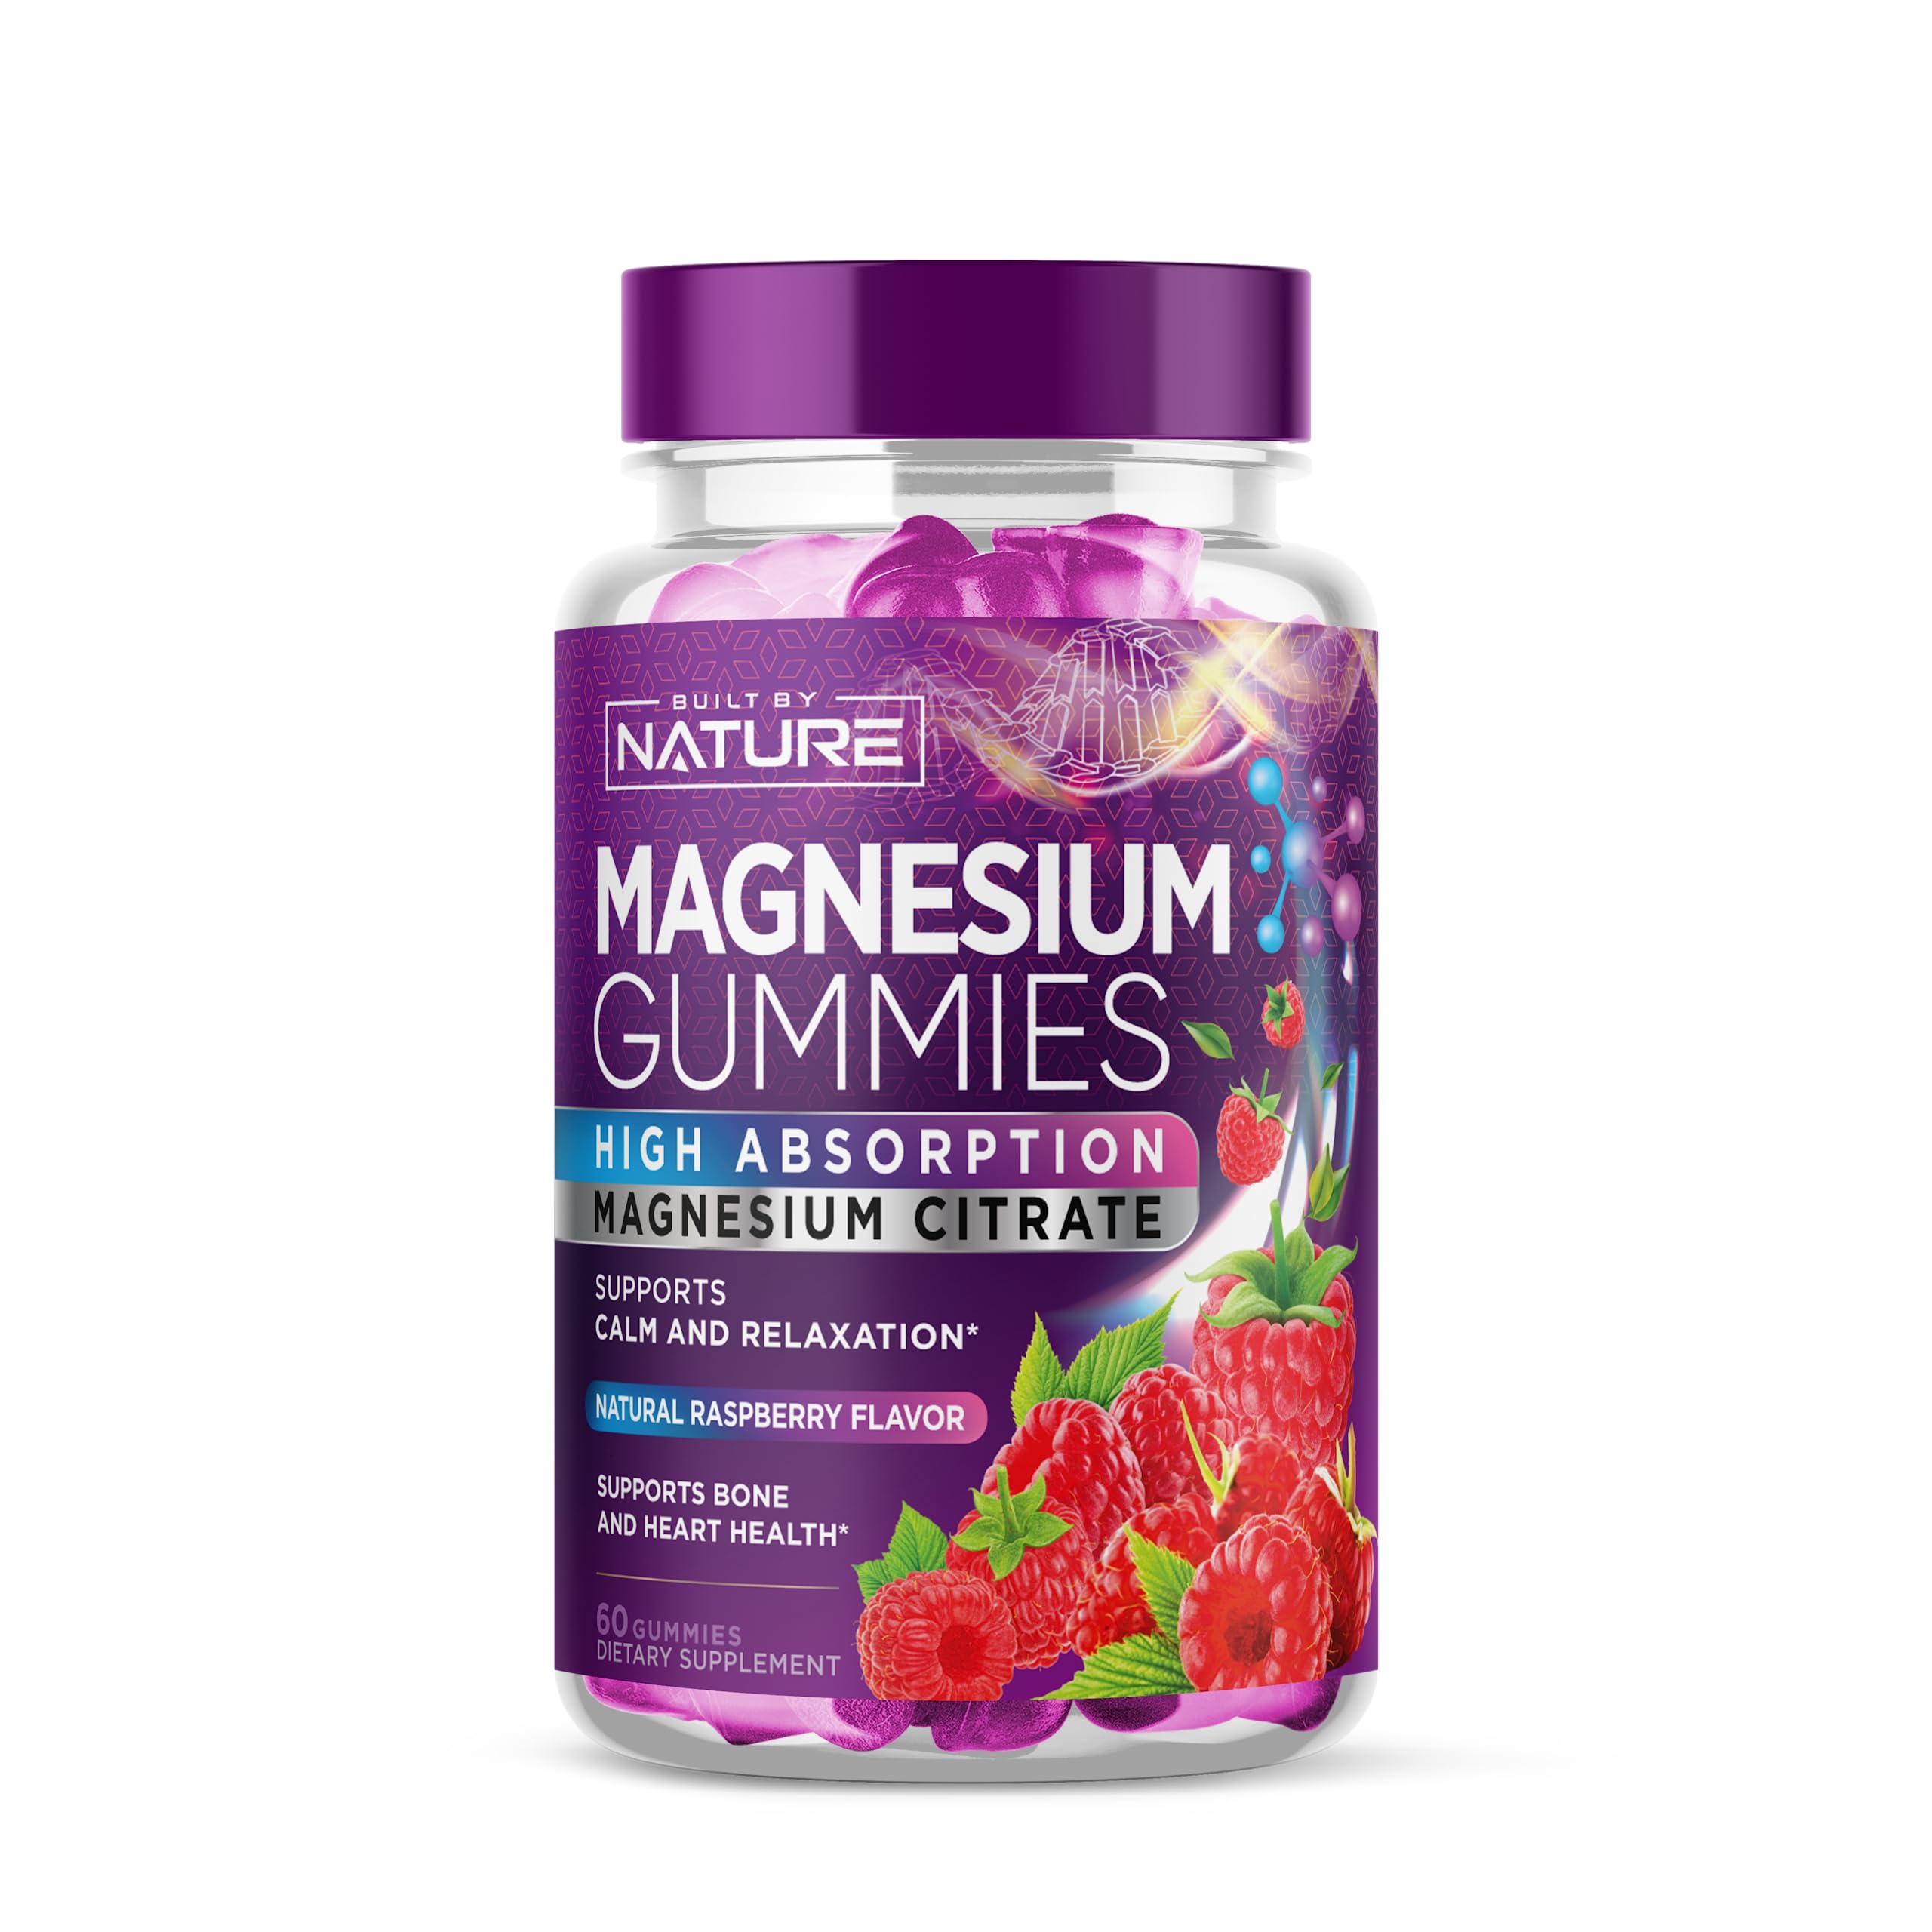 Magnesium Citrate Gummies – High Absorption Magnesium Gummy Supplement for Muscle, Nerve, Bone & Heart Support, Enzyme Function, Sleep Aid & Calm Relaxation, Pure Non-GMO, Vegan Safe, 60 Count